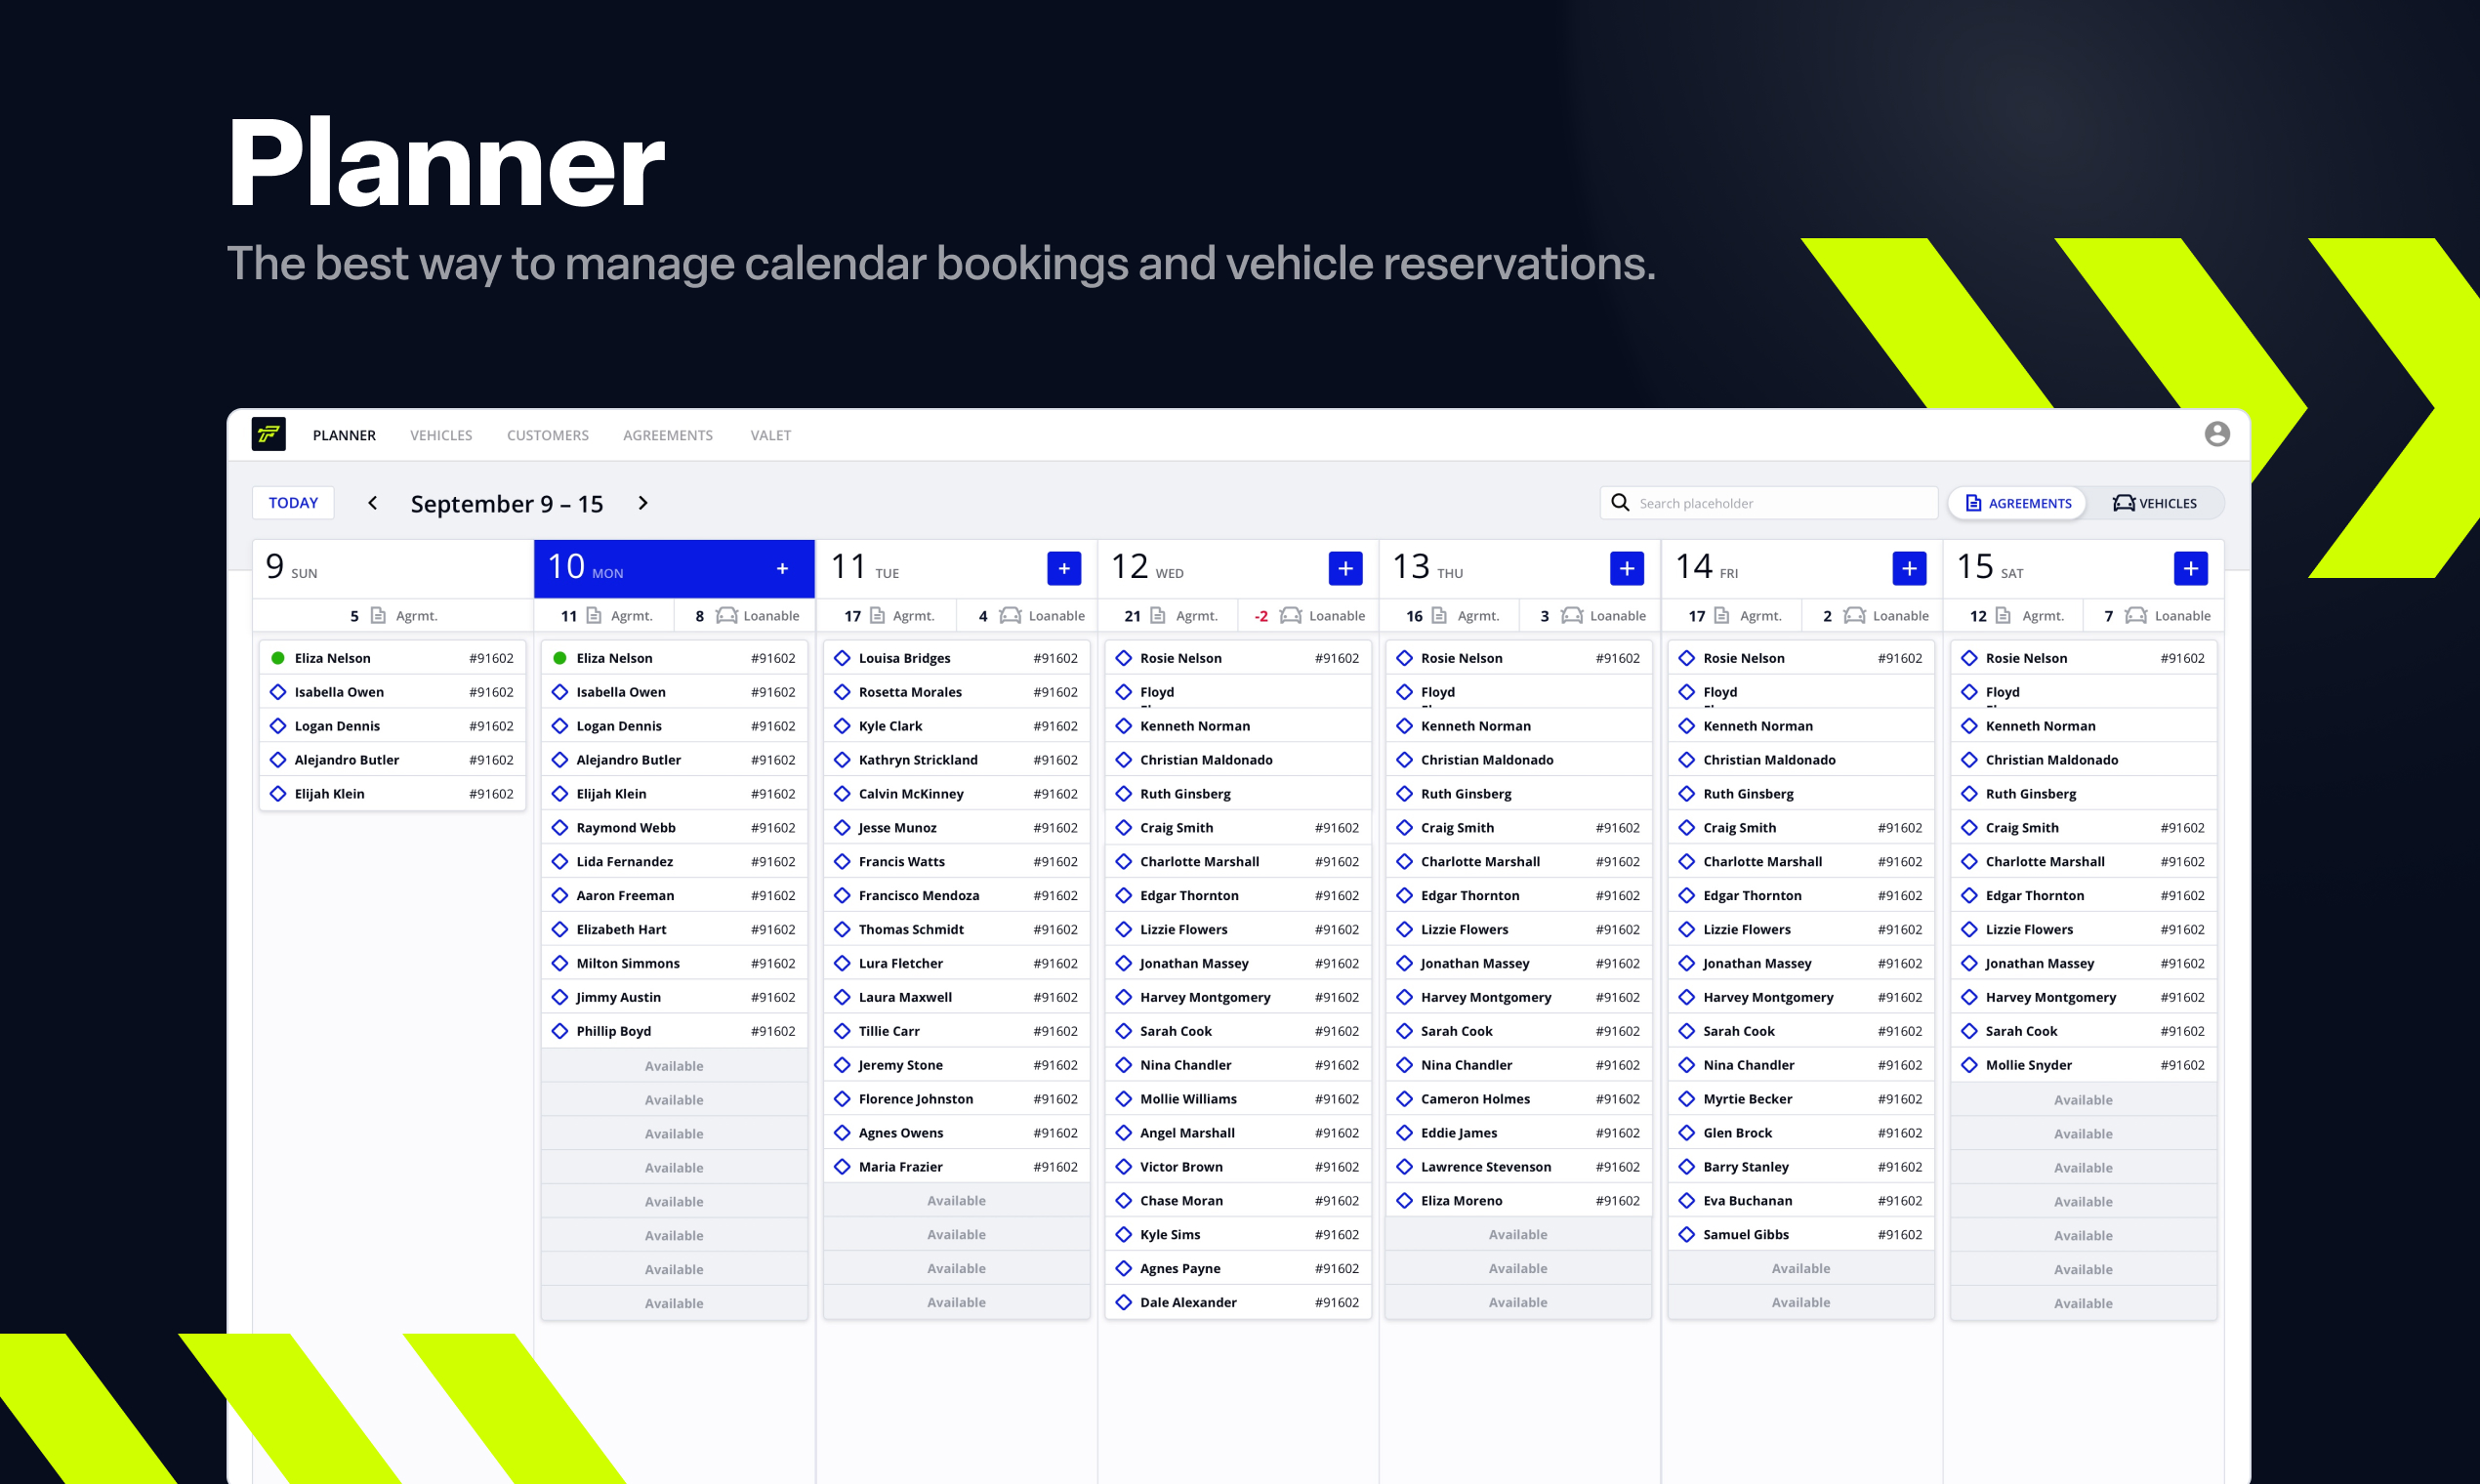 Planner – The best way to manage calendar bookings and vehicle reservations.